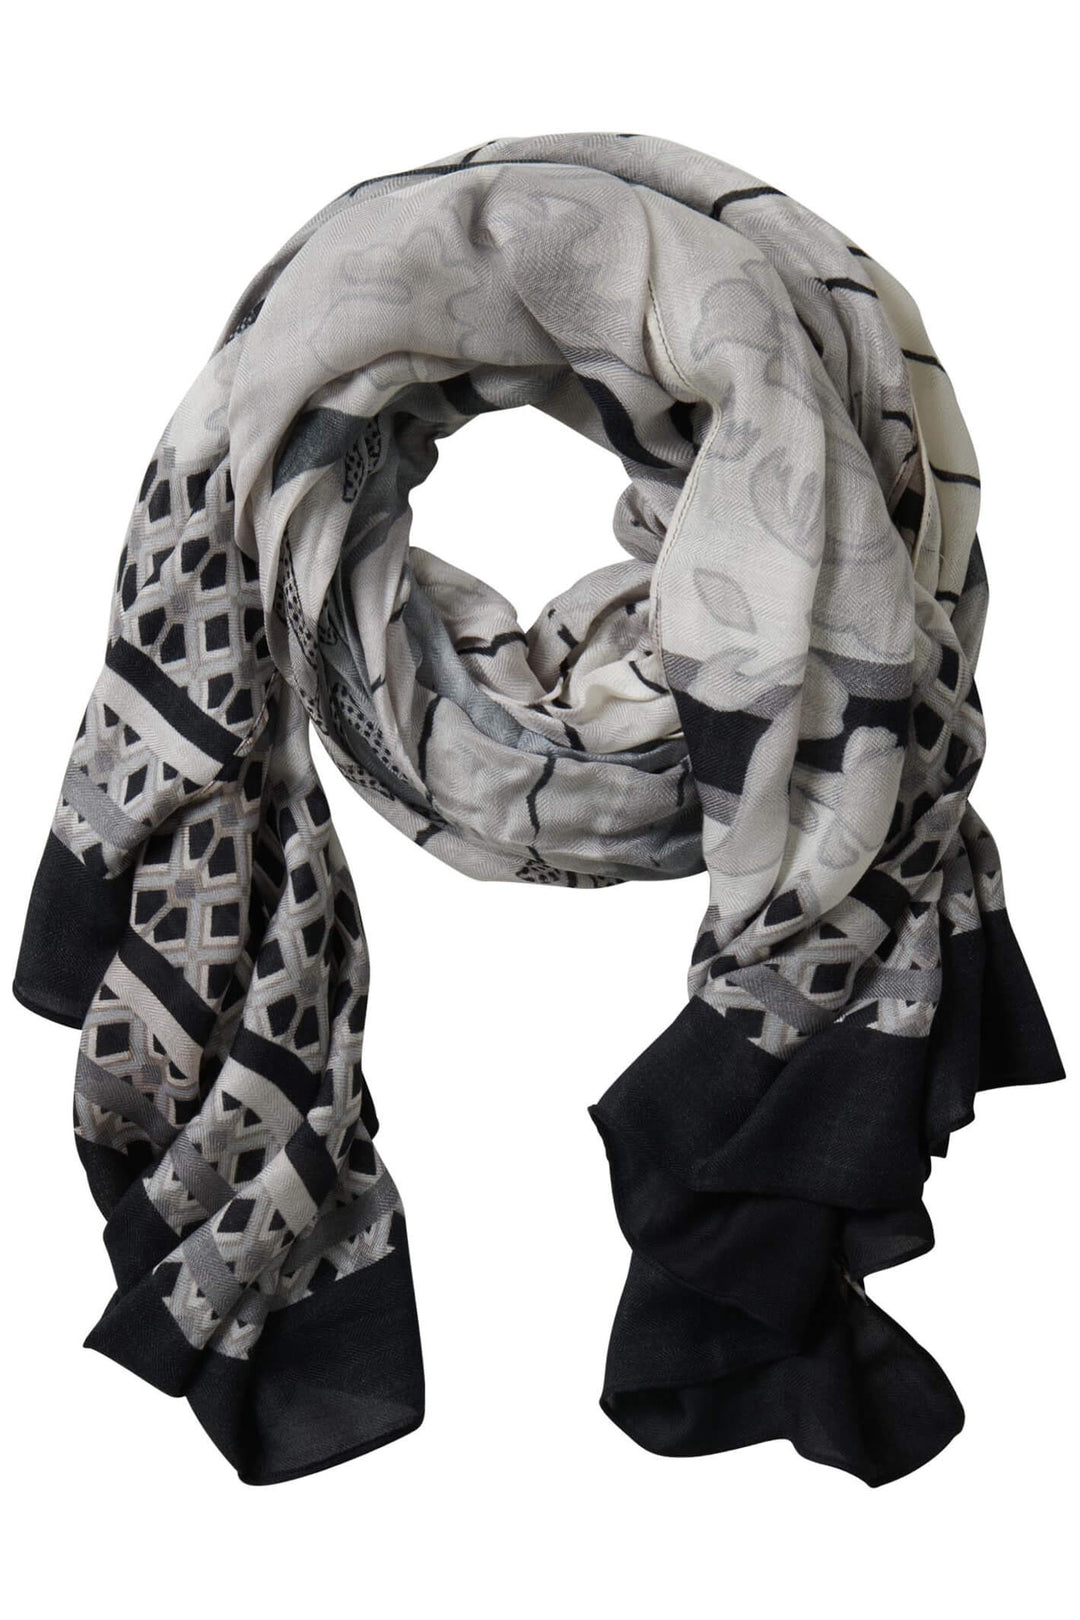 Betty Barclay 3379 2276 7898 Beige Black Print Scarf - Dotique Chesterfield